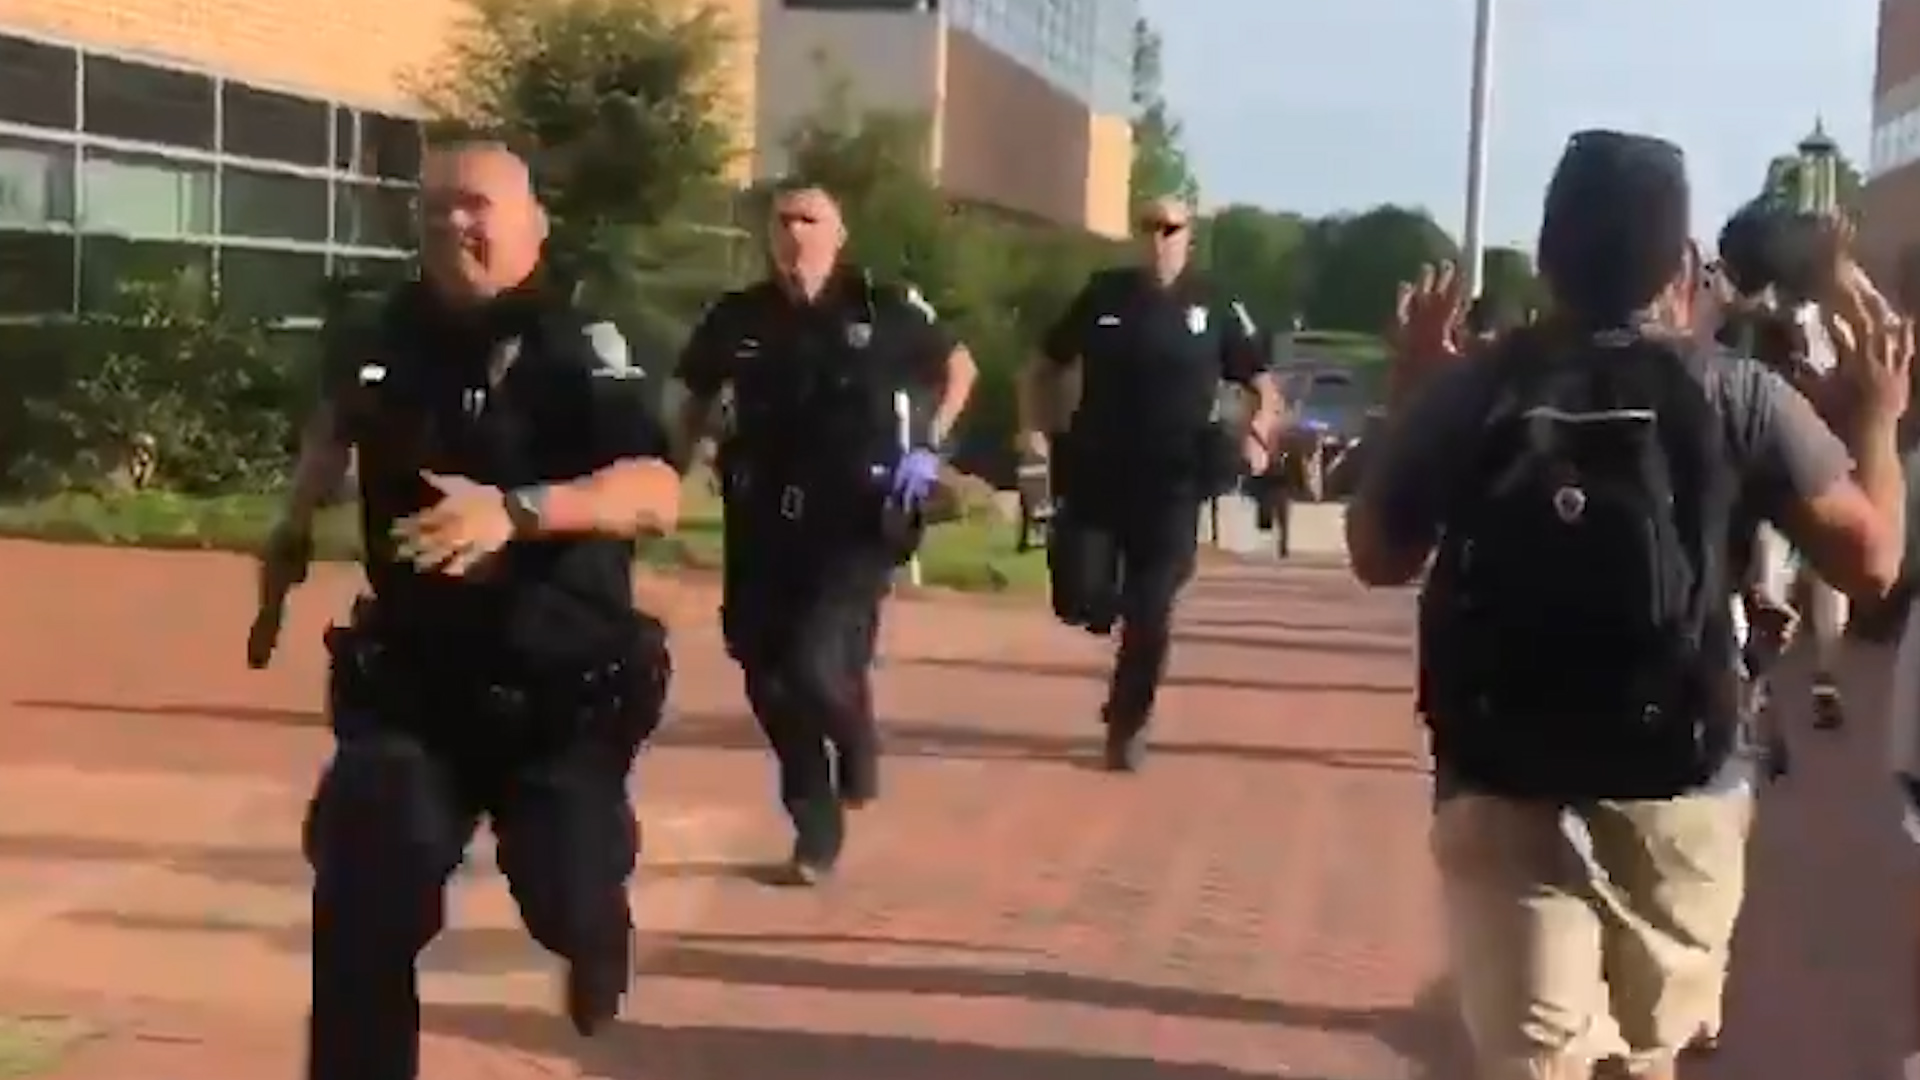 Police Run To Reported Shooting At Unc Charlotte The Washington Post